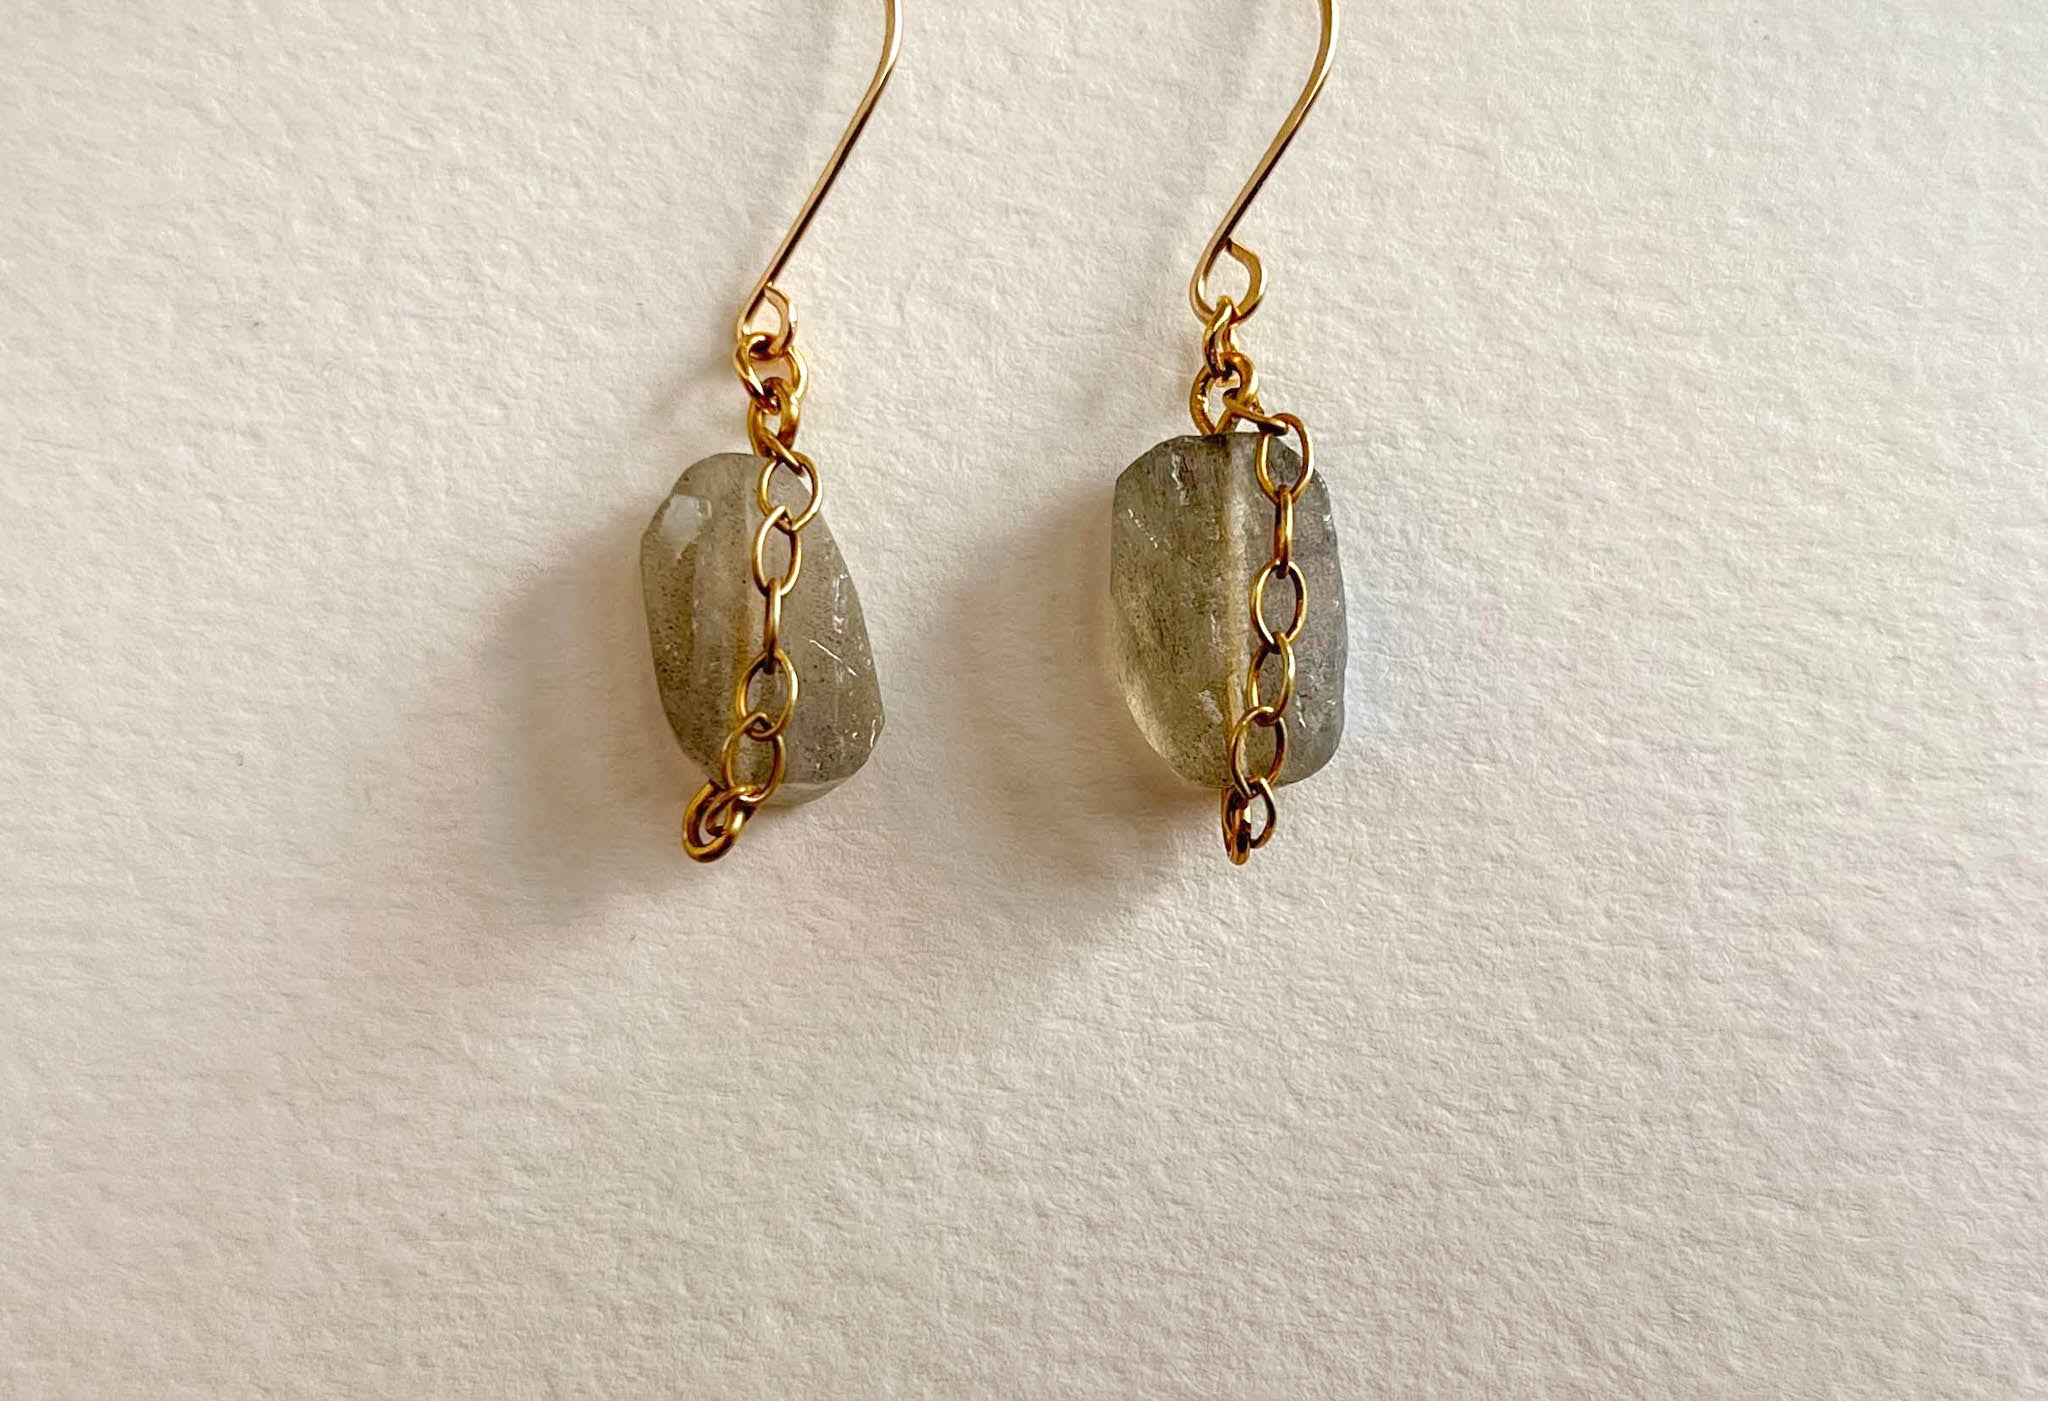 Raw Labradorite Dangle Earrings with Chain Accent